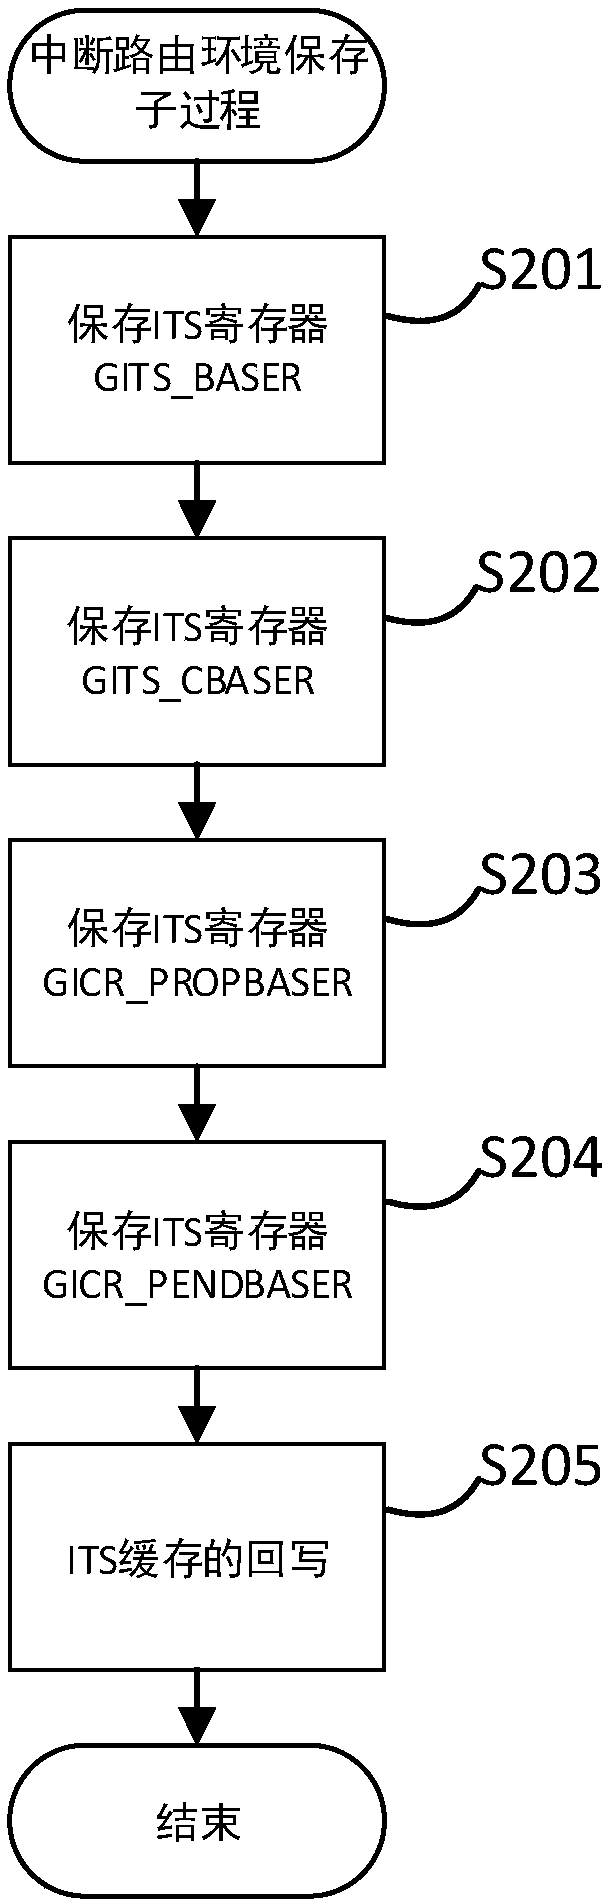 Interrupt routing environment recovery method for Feiteng processor dormancy process